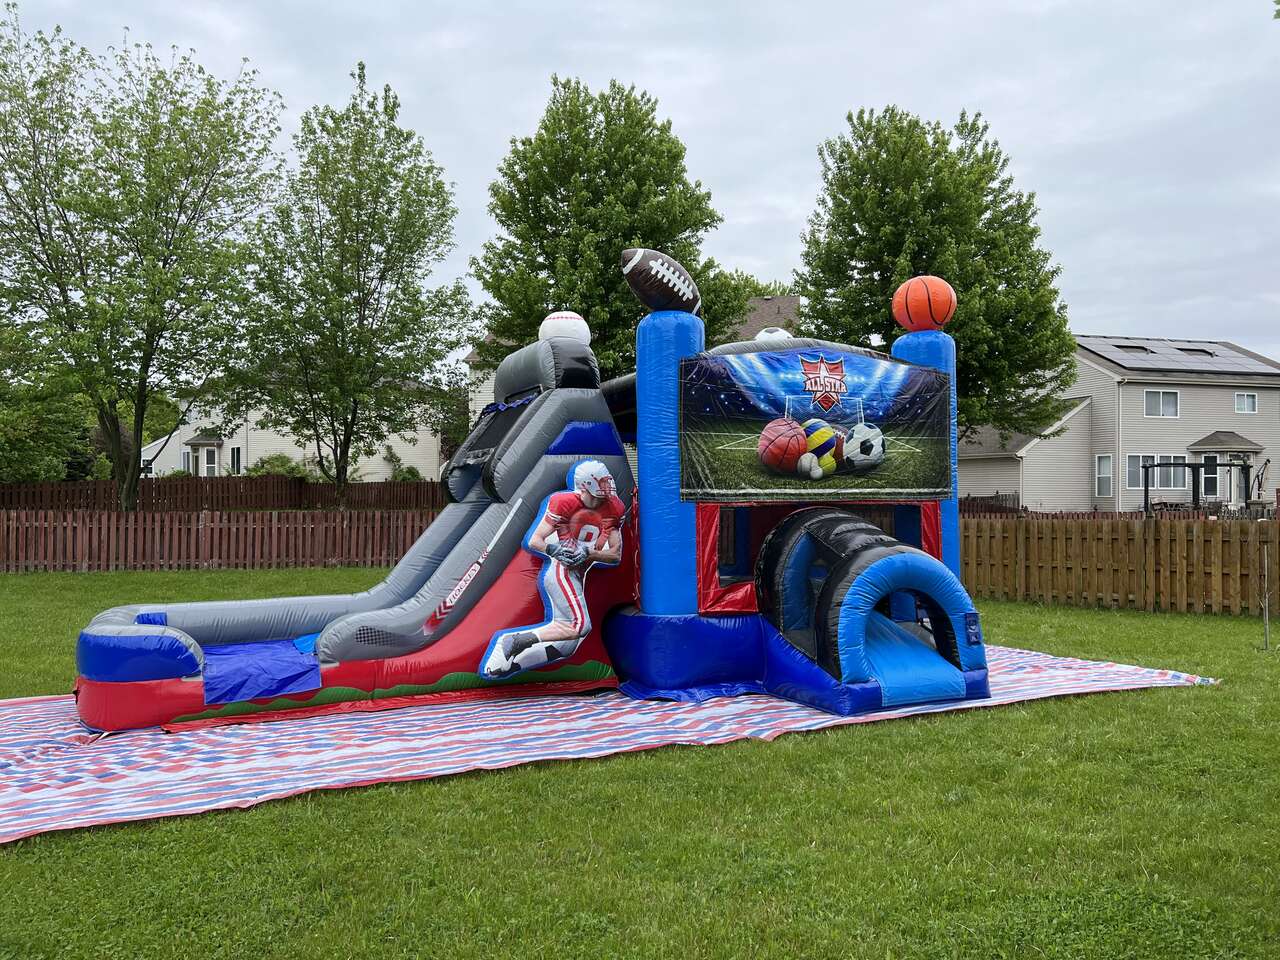 Wet/dry bounce house rentals, Fun Bounces Rental, Lockport, IL 60441